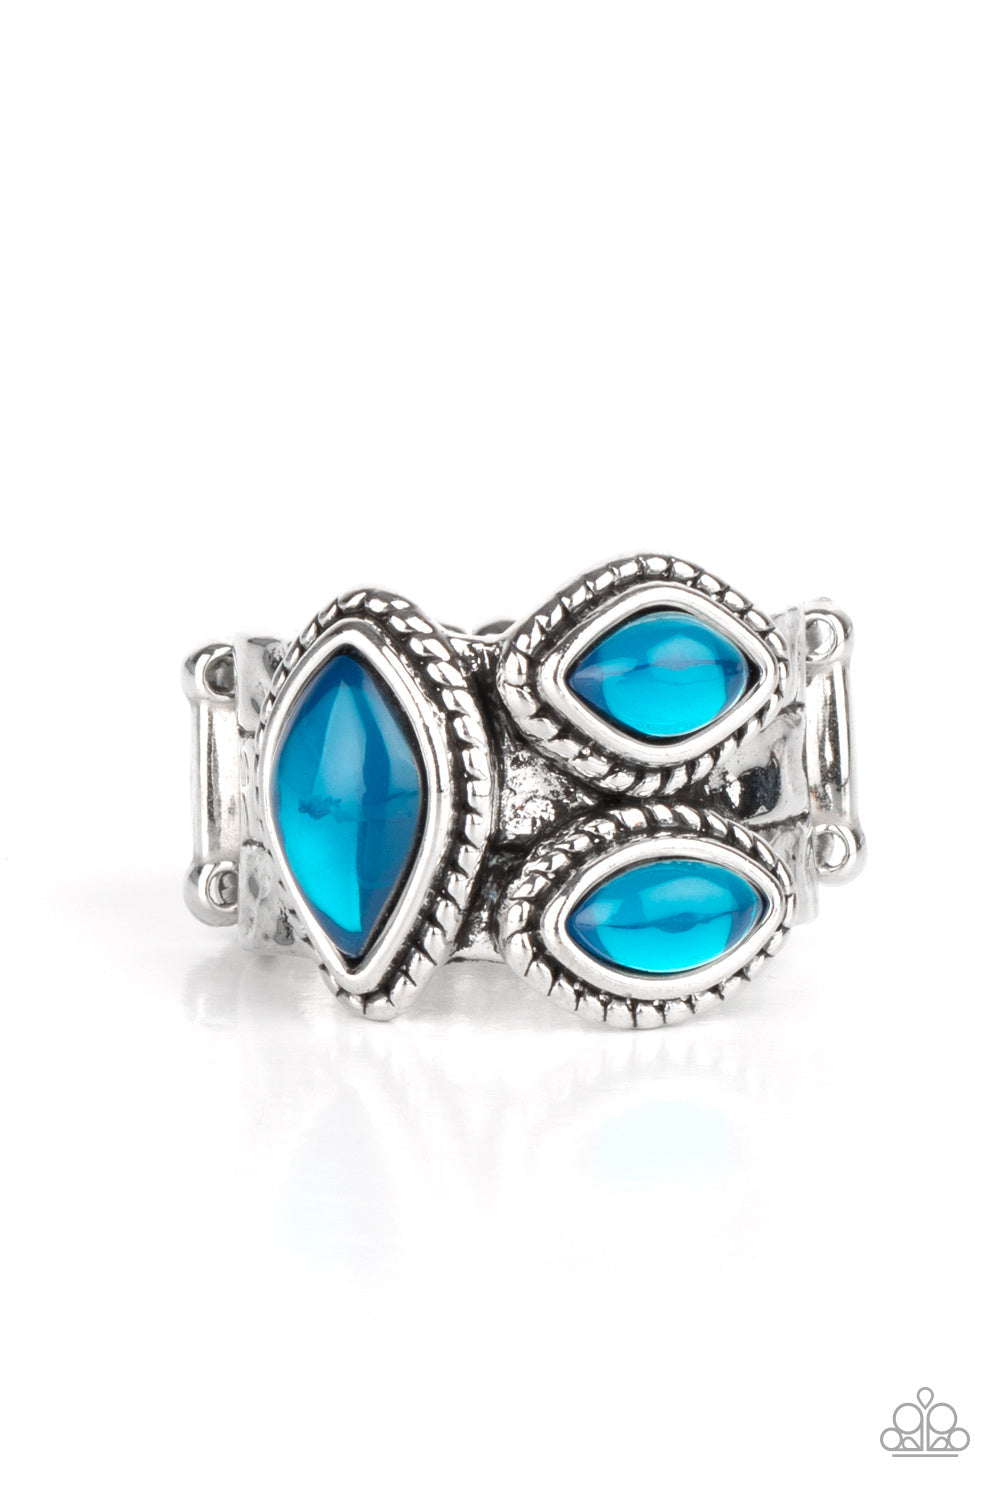 The Charisma Collector - Blue and Silver Ring - Paparazzi Accessories - Trio of glassy blue marquise beads embellish the front of a hammered silver band etched in faux layers, creating an ethereal display atop the finger.